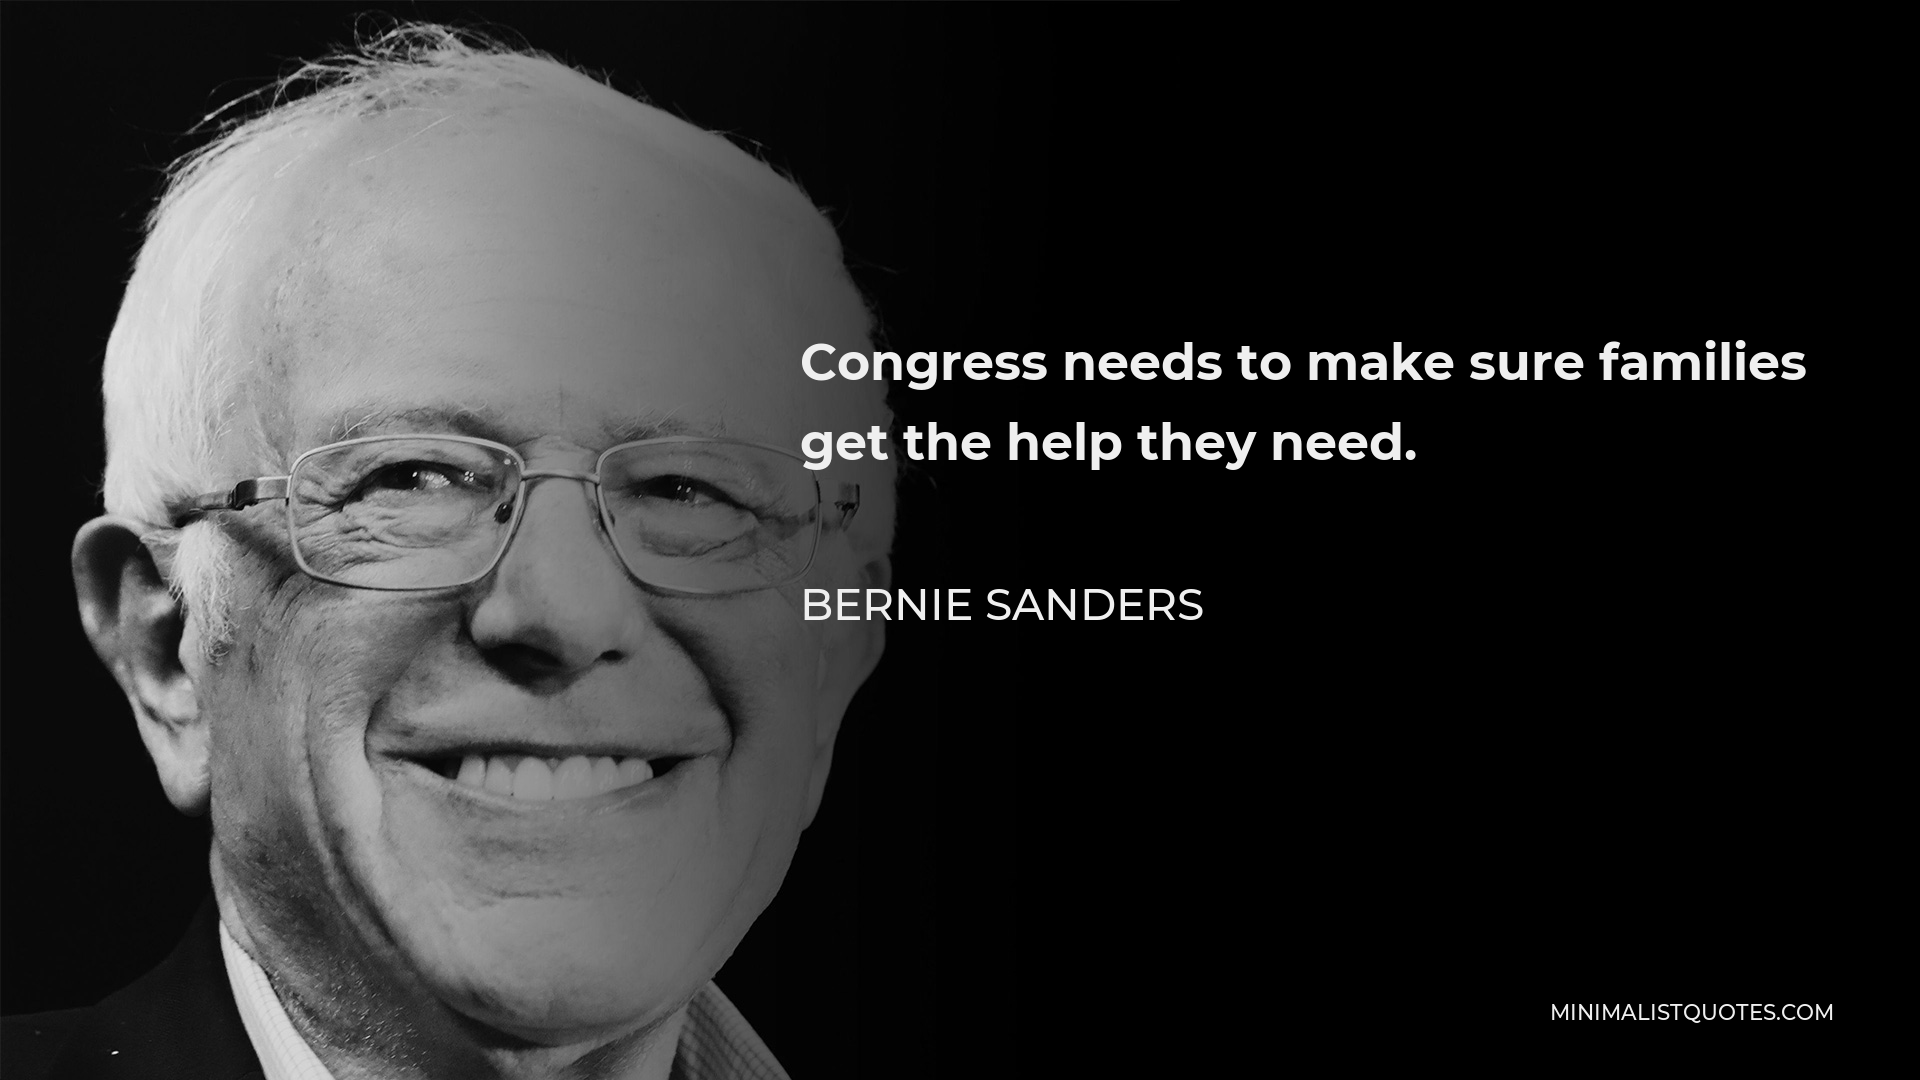 Bernie Sanders Quote - Congress needs to make sure families get the help they need.